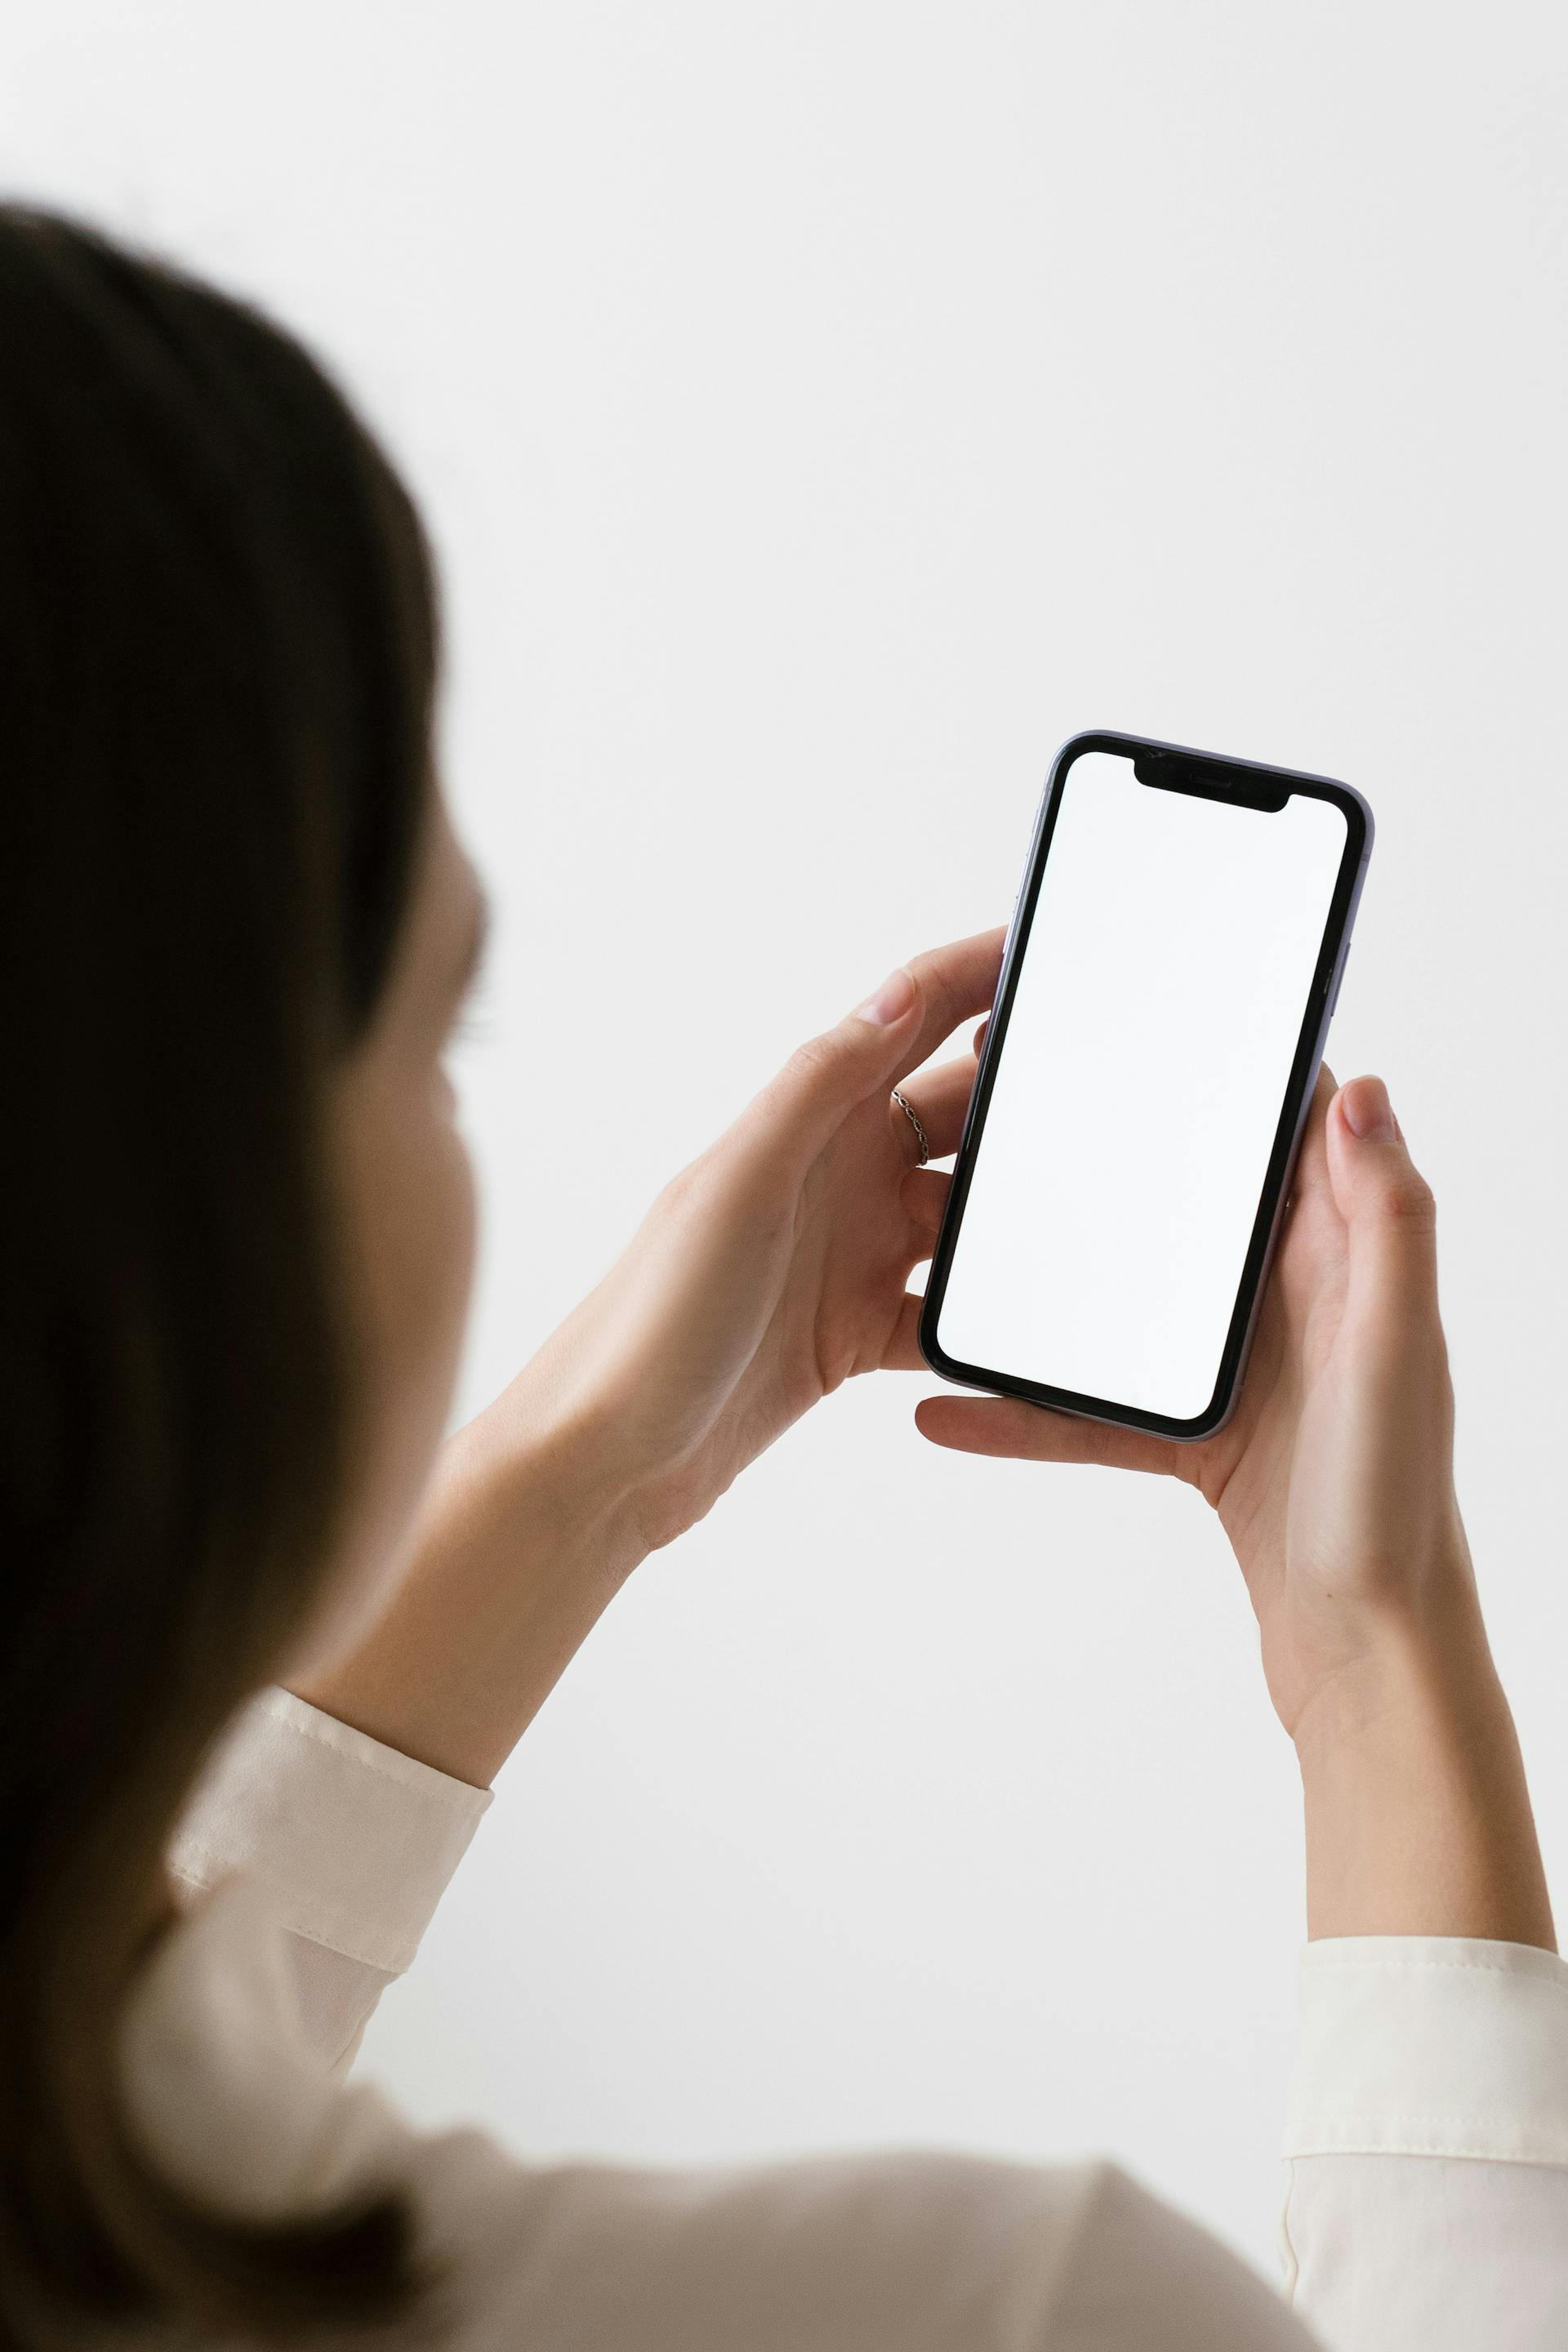 A woman holding a phone | Source: Pexels